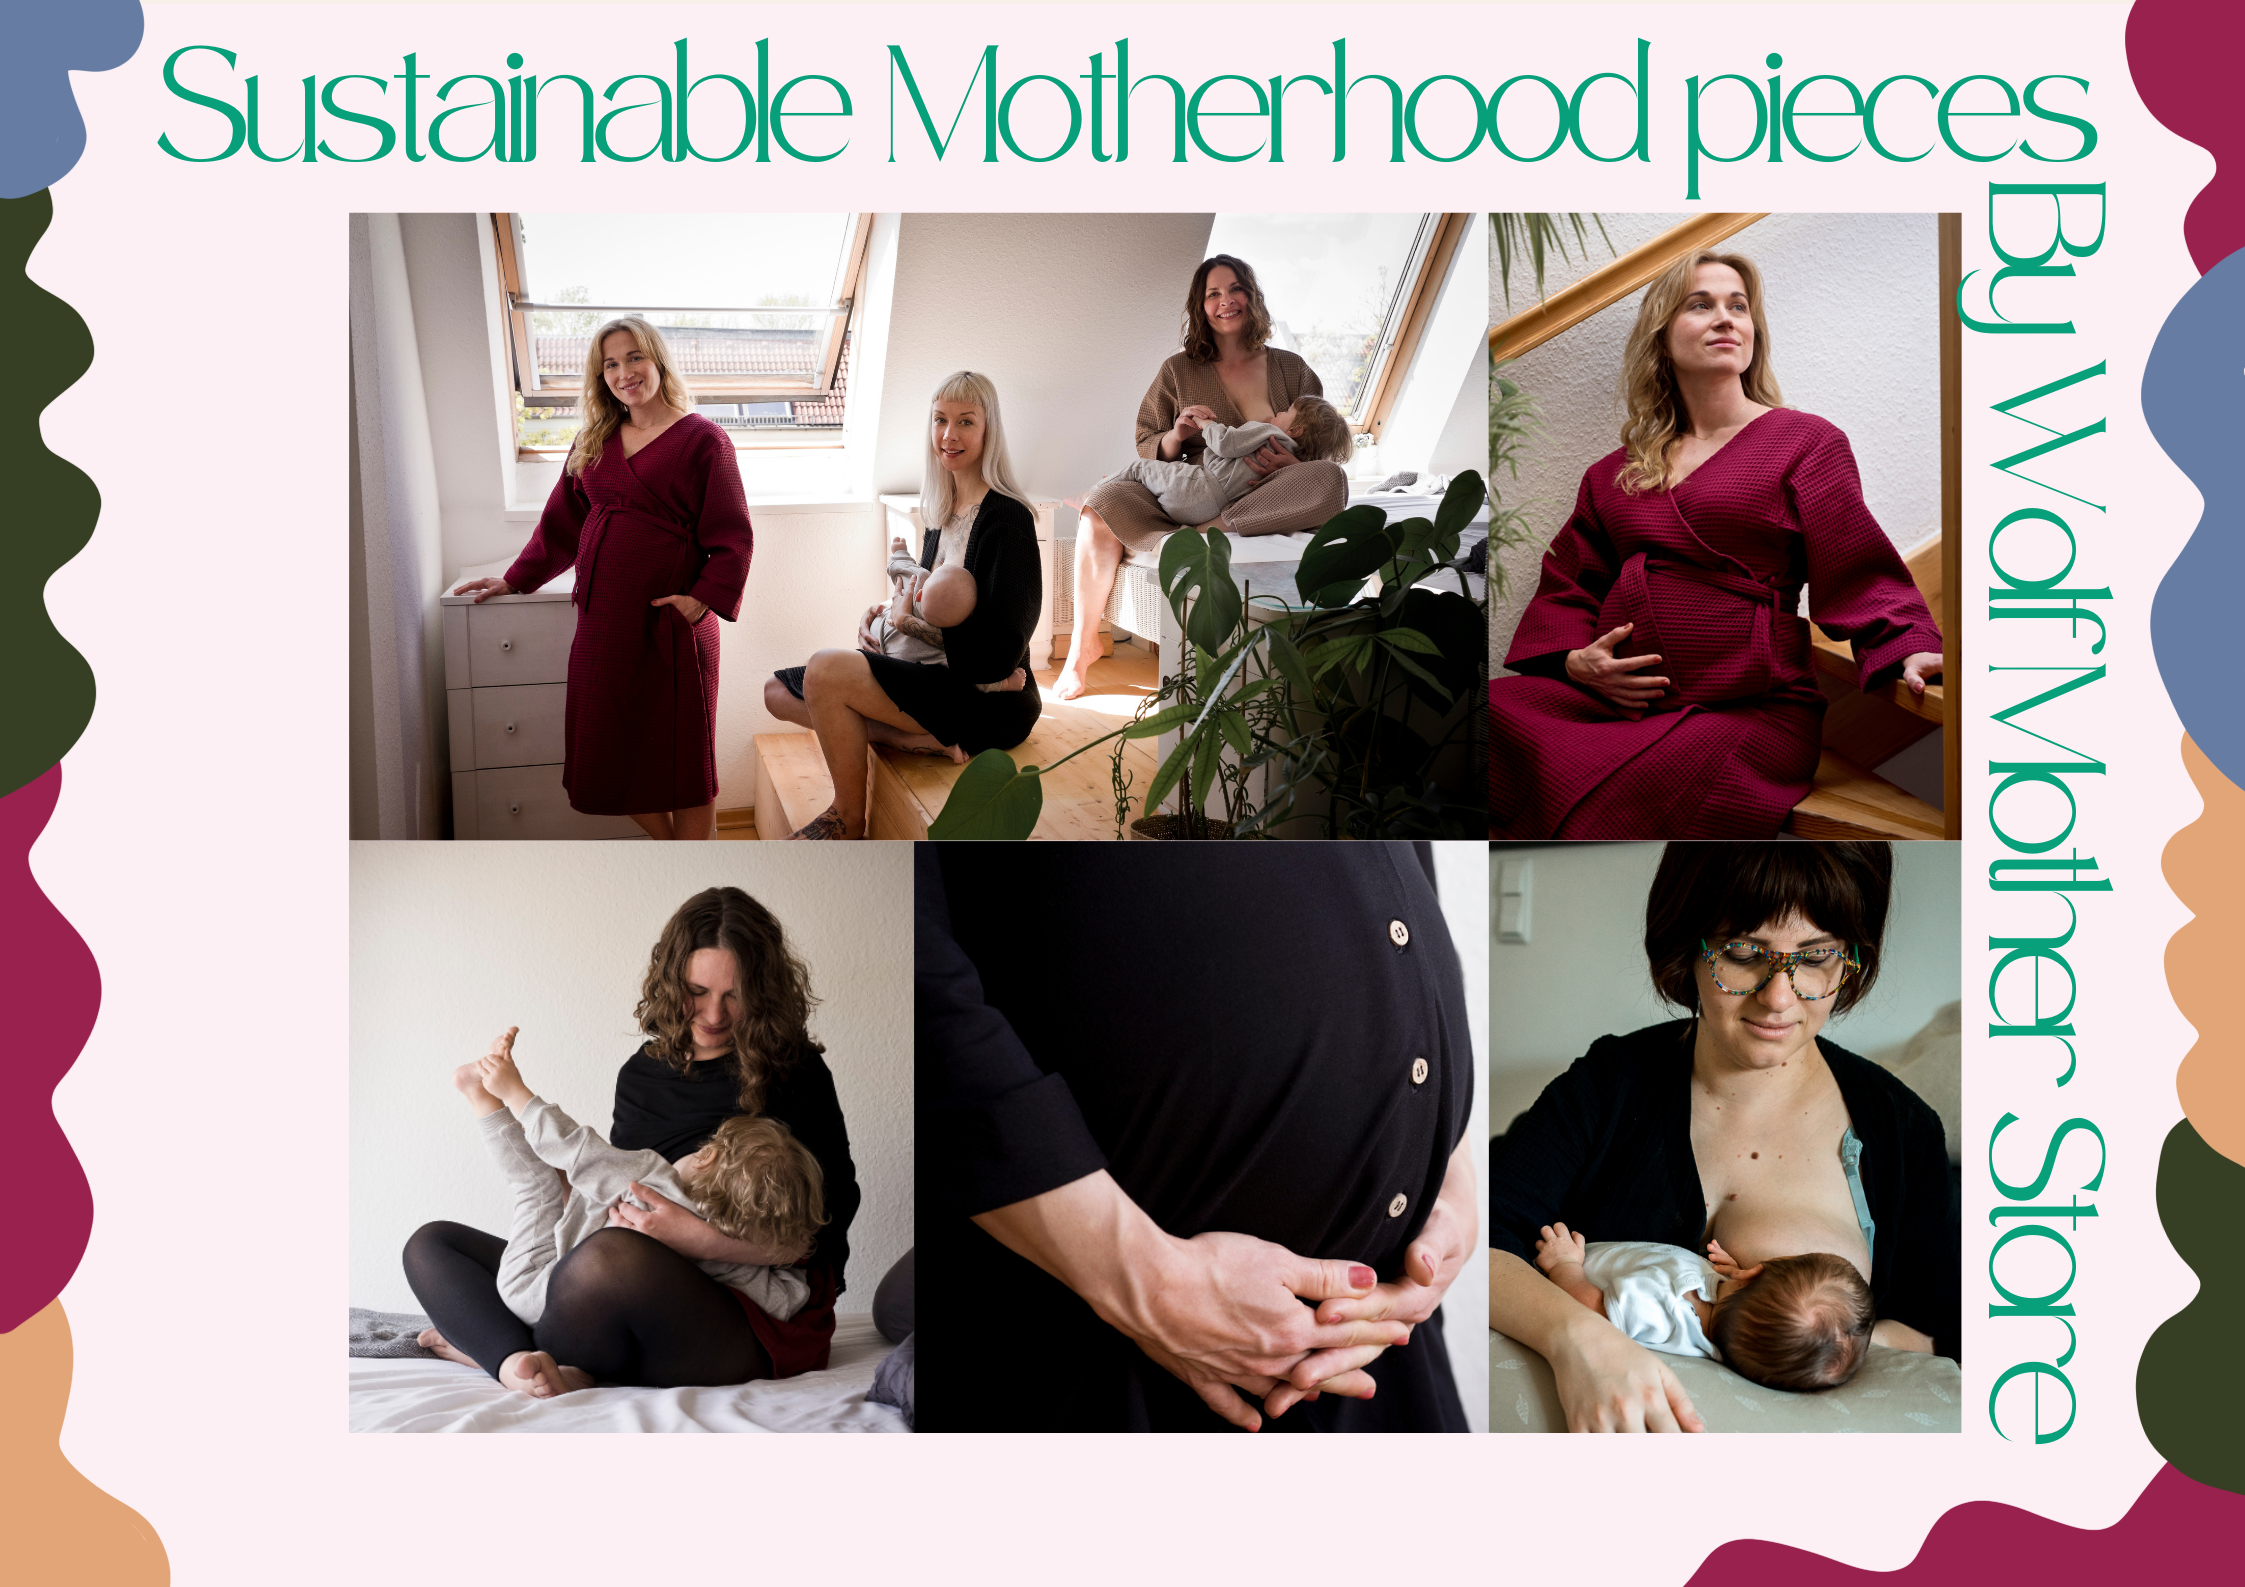 Wolf Mothers Store: The brand putting sustainable parenthood first.